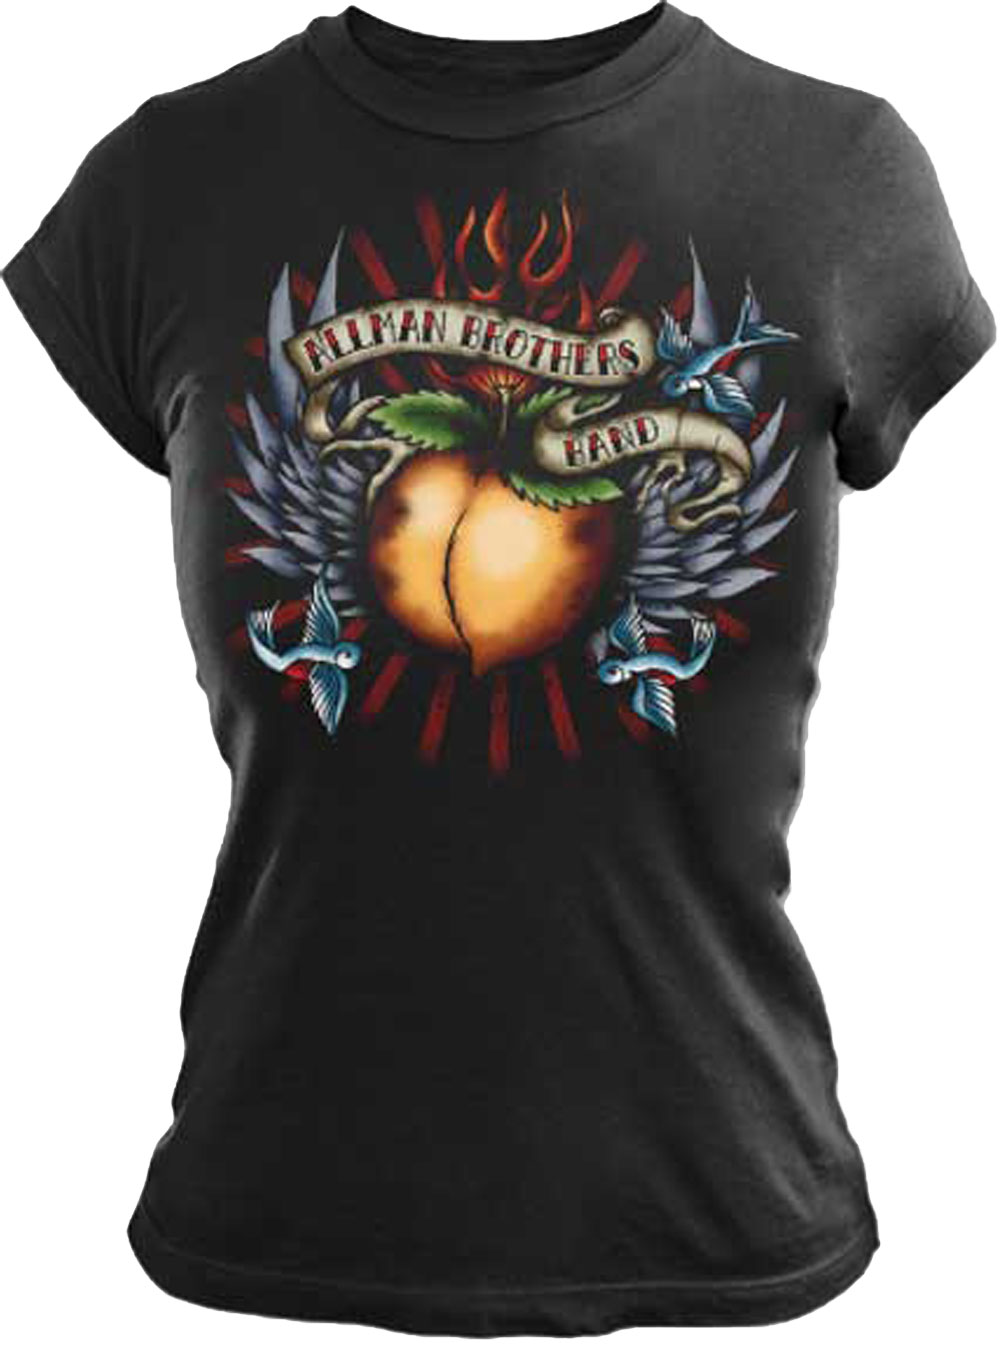 The Allman Brothers Band Tattoo Girls Juniors Tissue T-Shirt - image 1 of 1